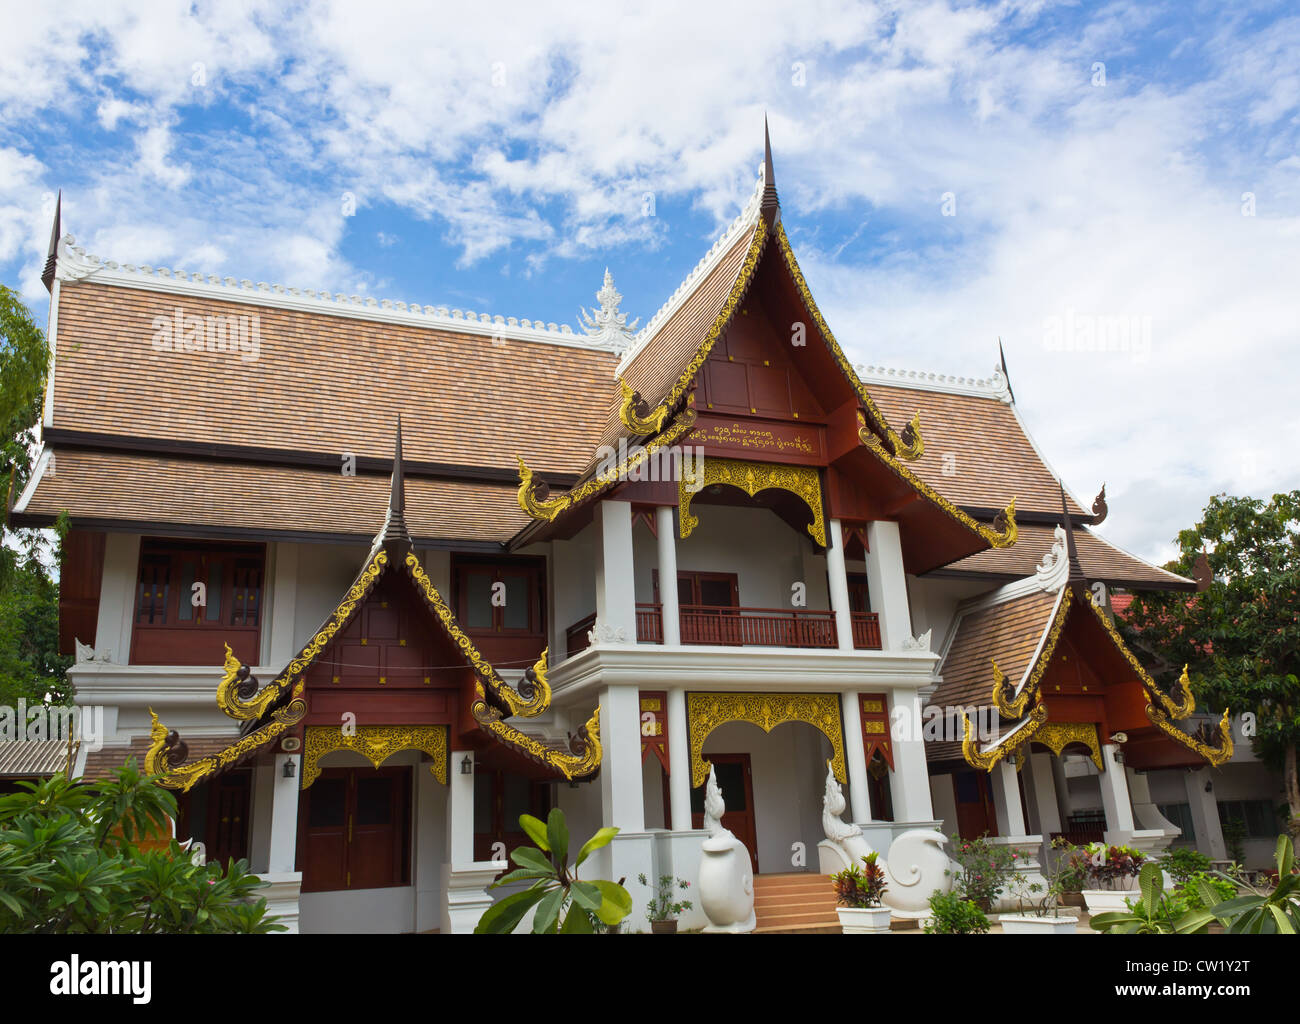 Northern Thai Art and Architecture of Building. Stock Photo